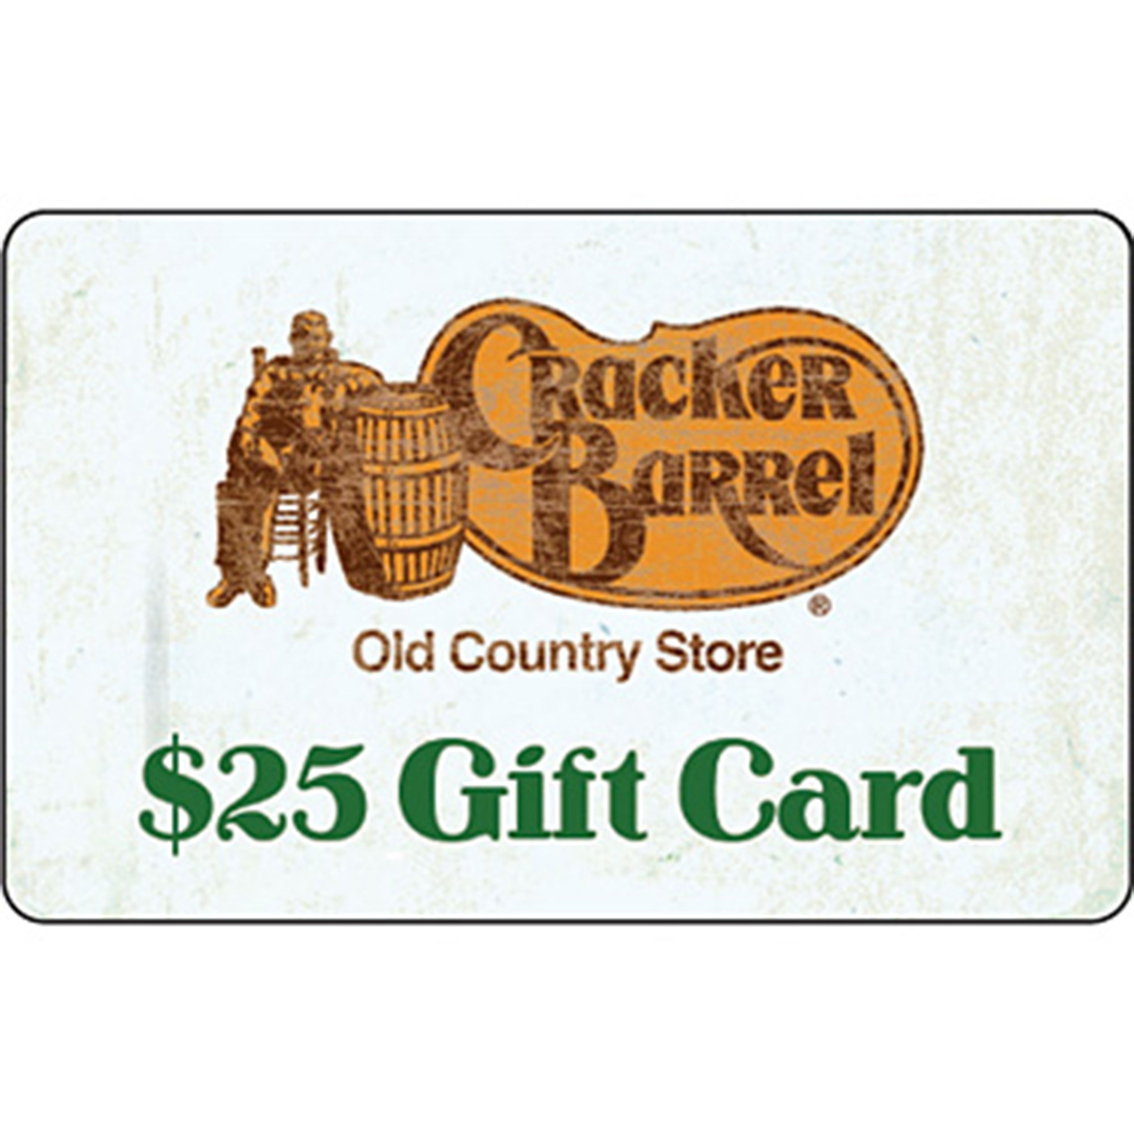 Cracker Barrel Old Country Store $25 Gift Card